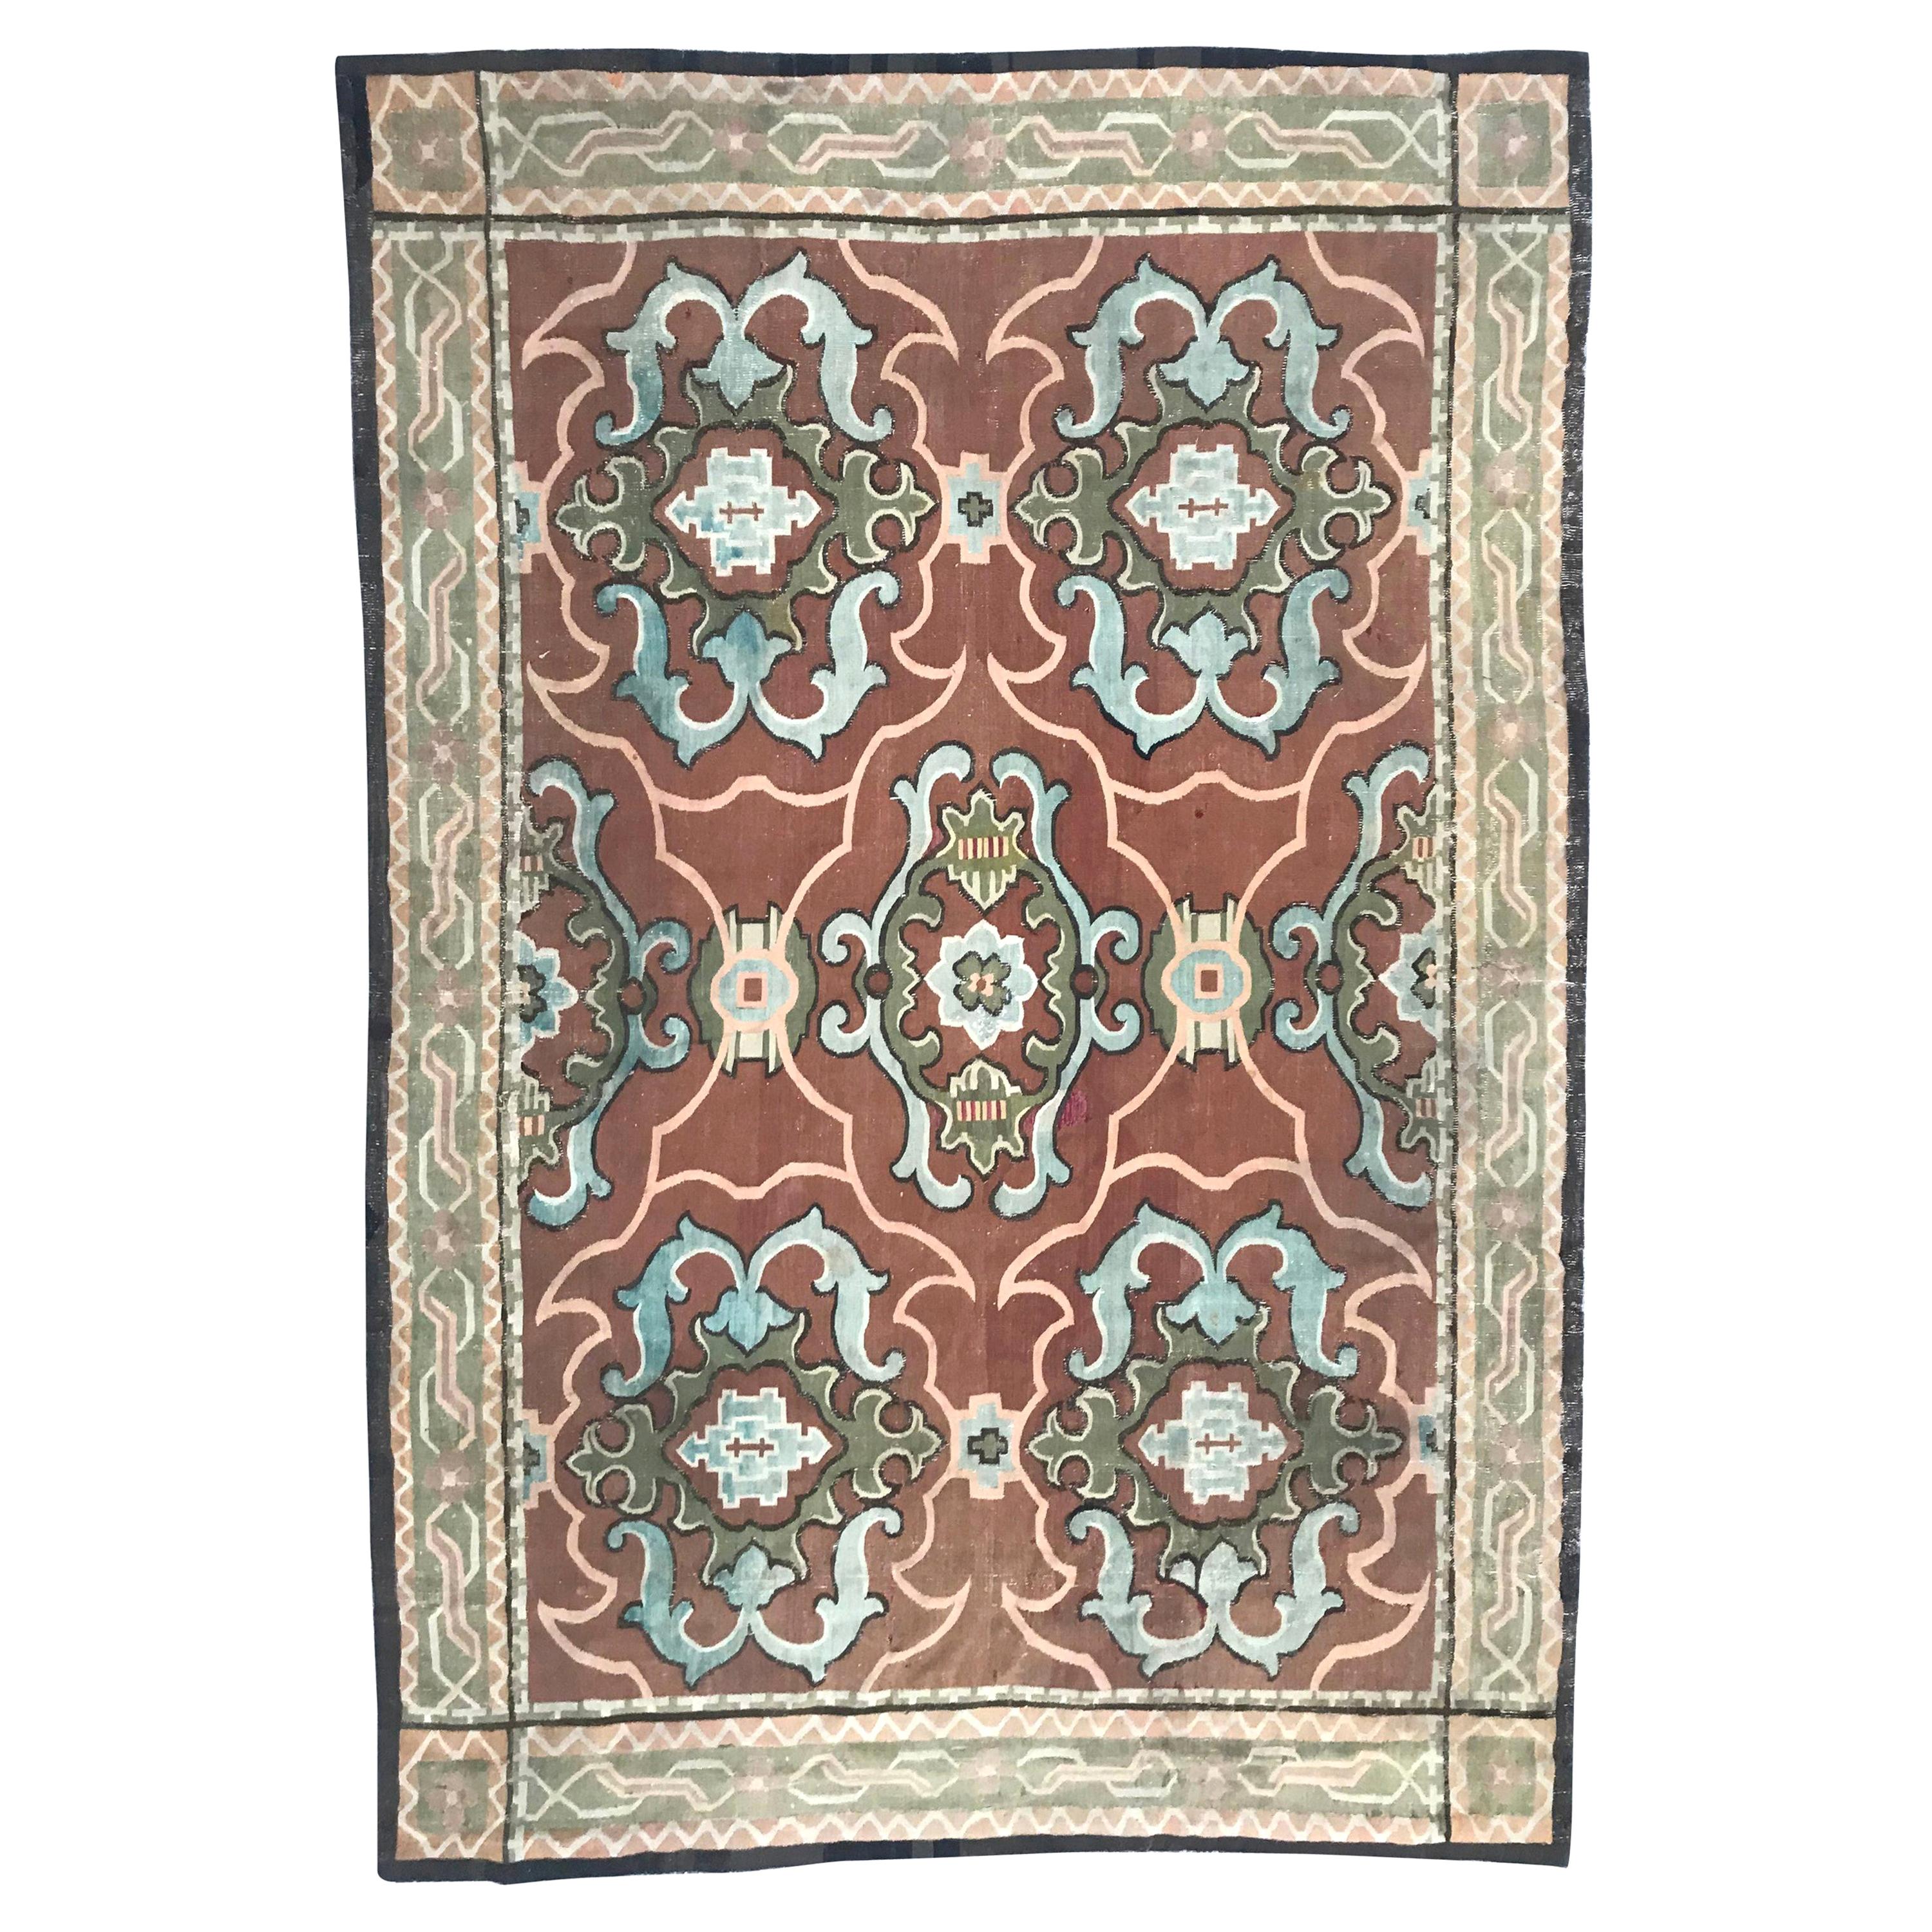 Bobyrug’s Antique 19th Century Aubusson Woven 18th Century Style Rug For Sale